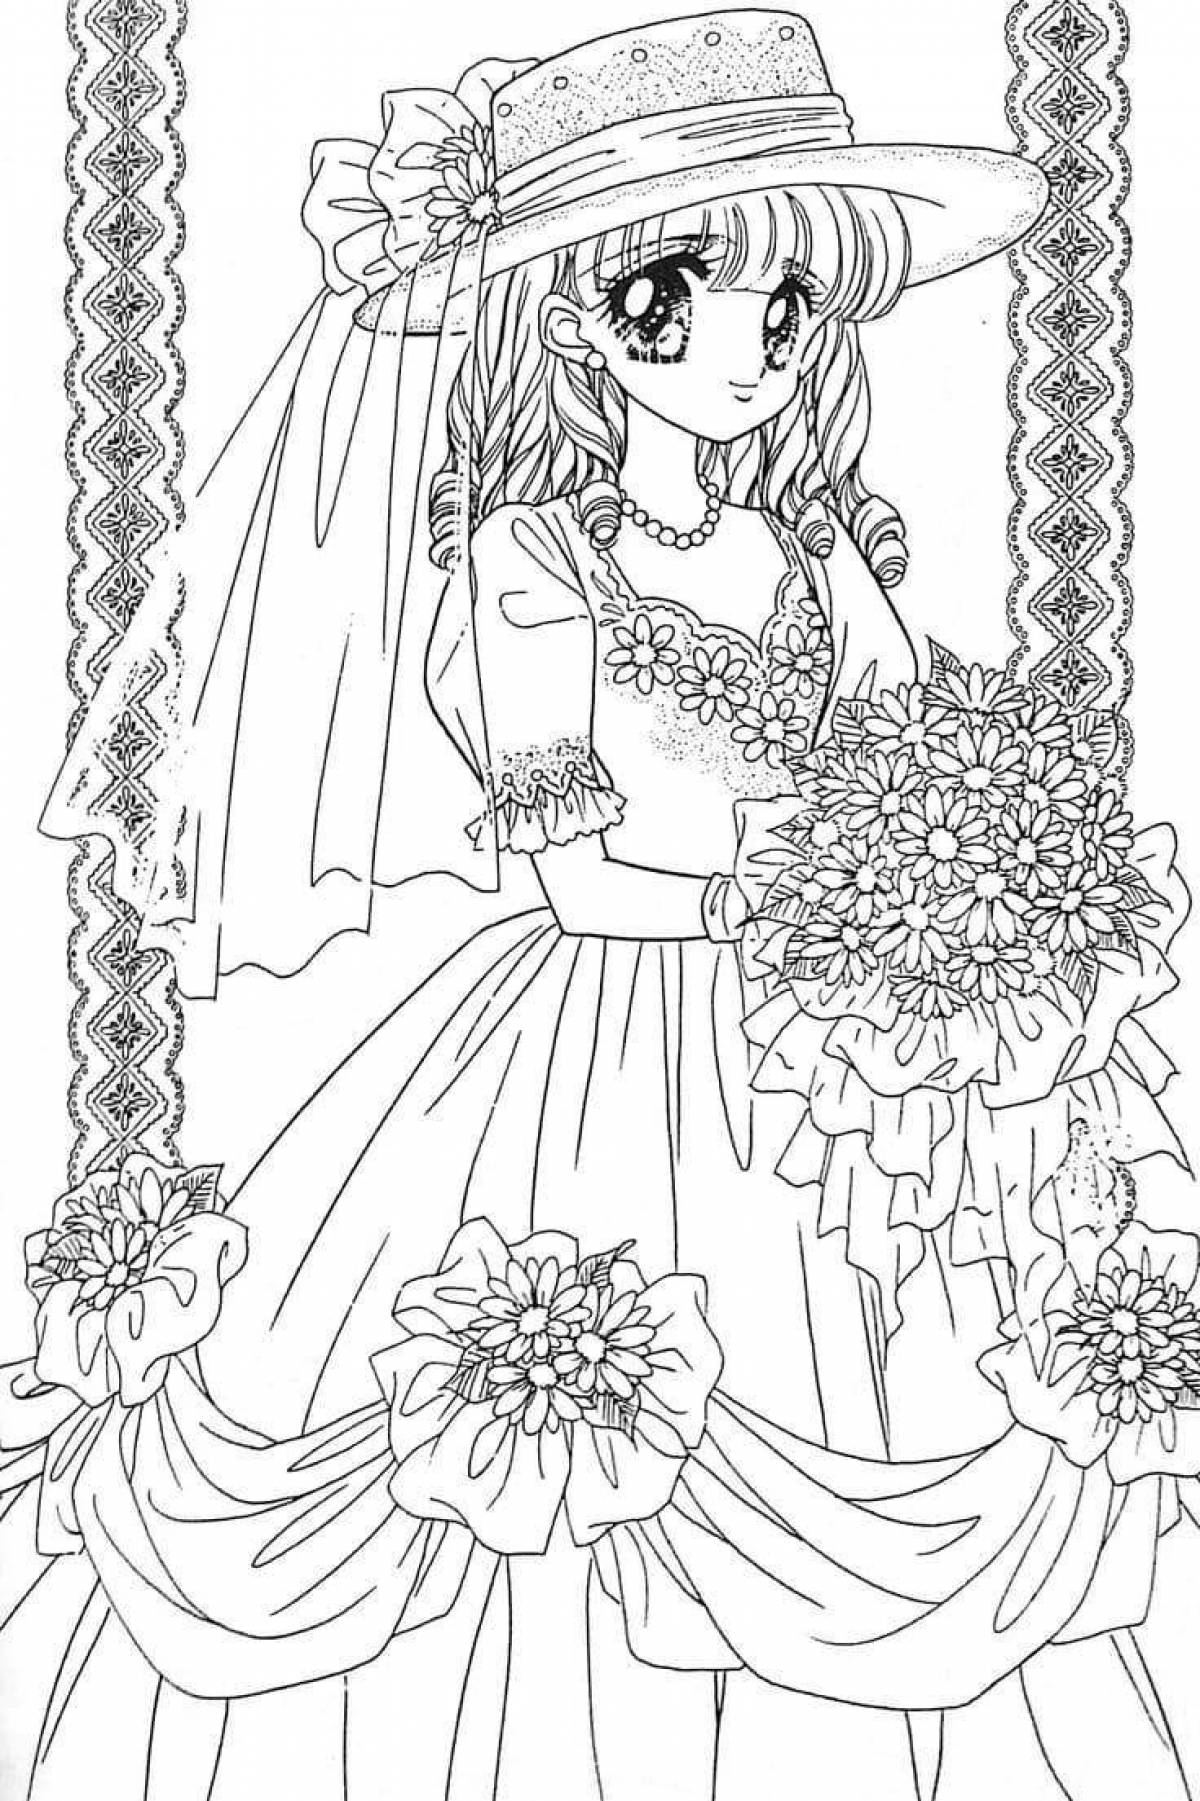 Peaceful anime stress relief coloring book